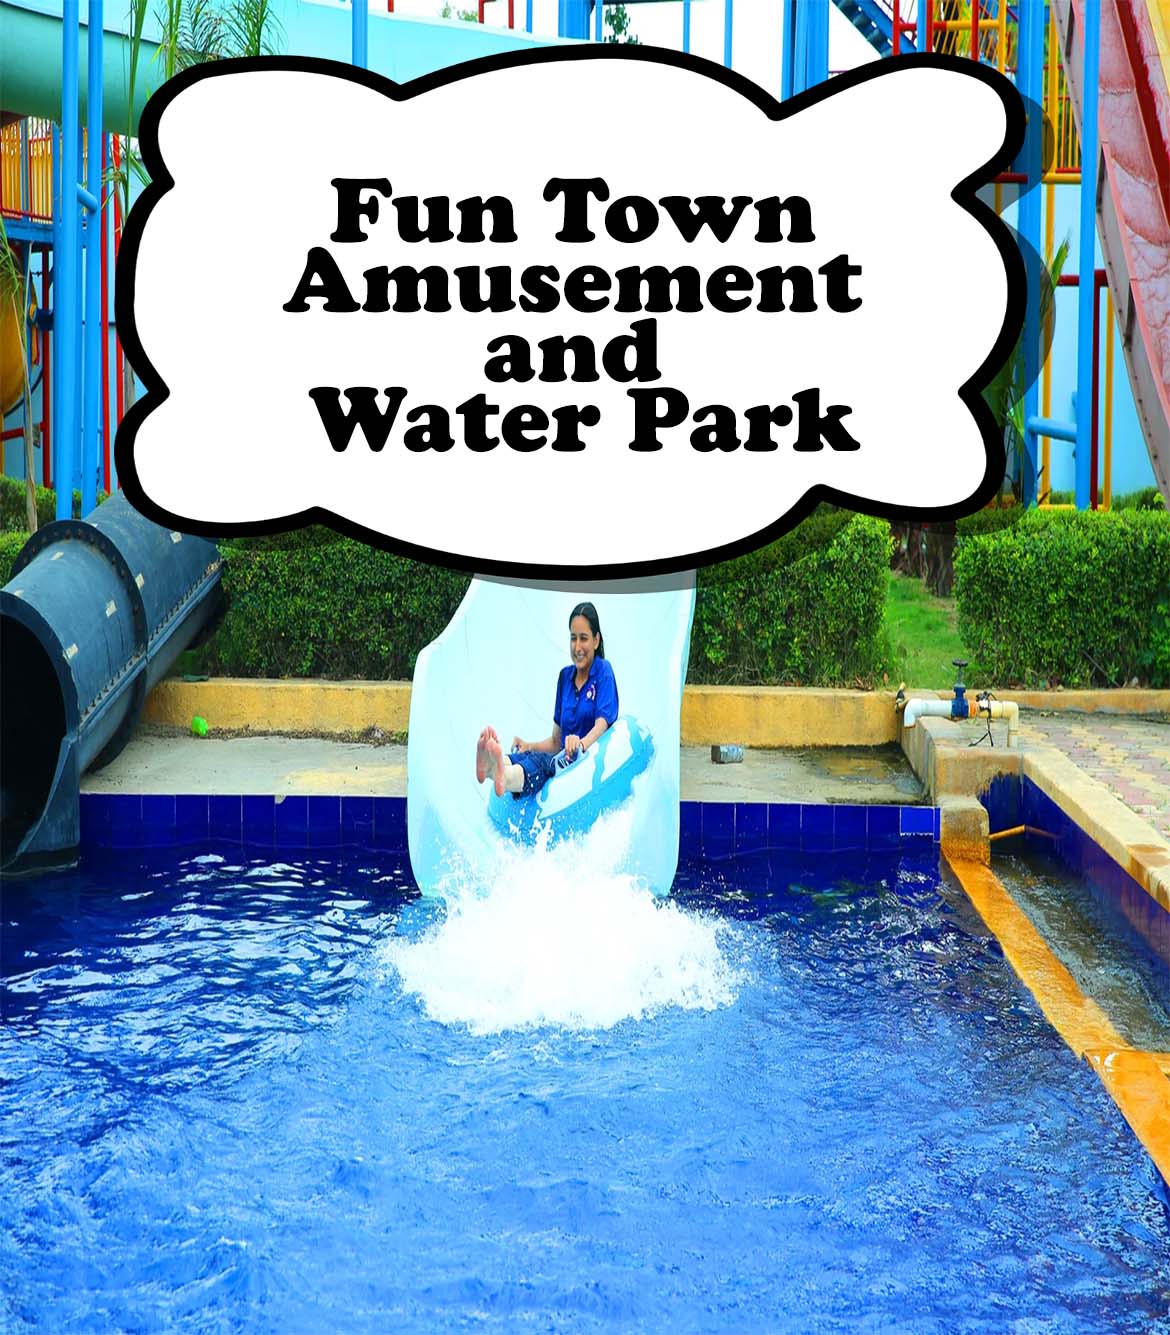 Fun Town Amusement and Water Park Tickets